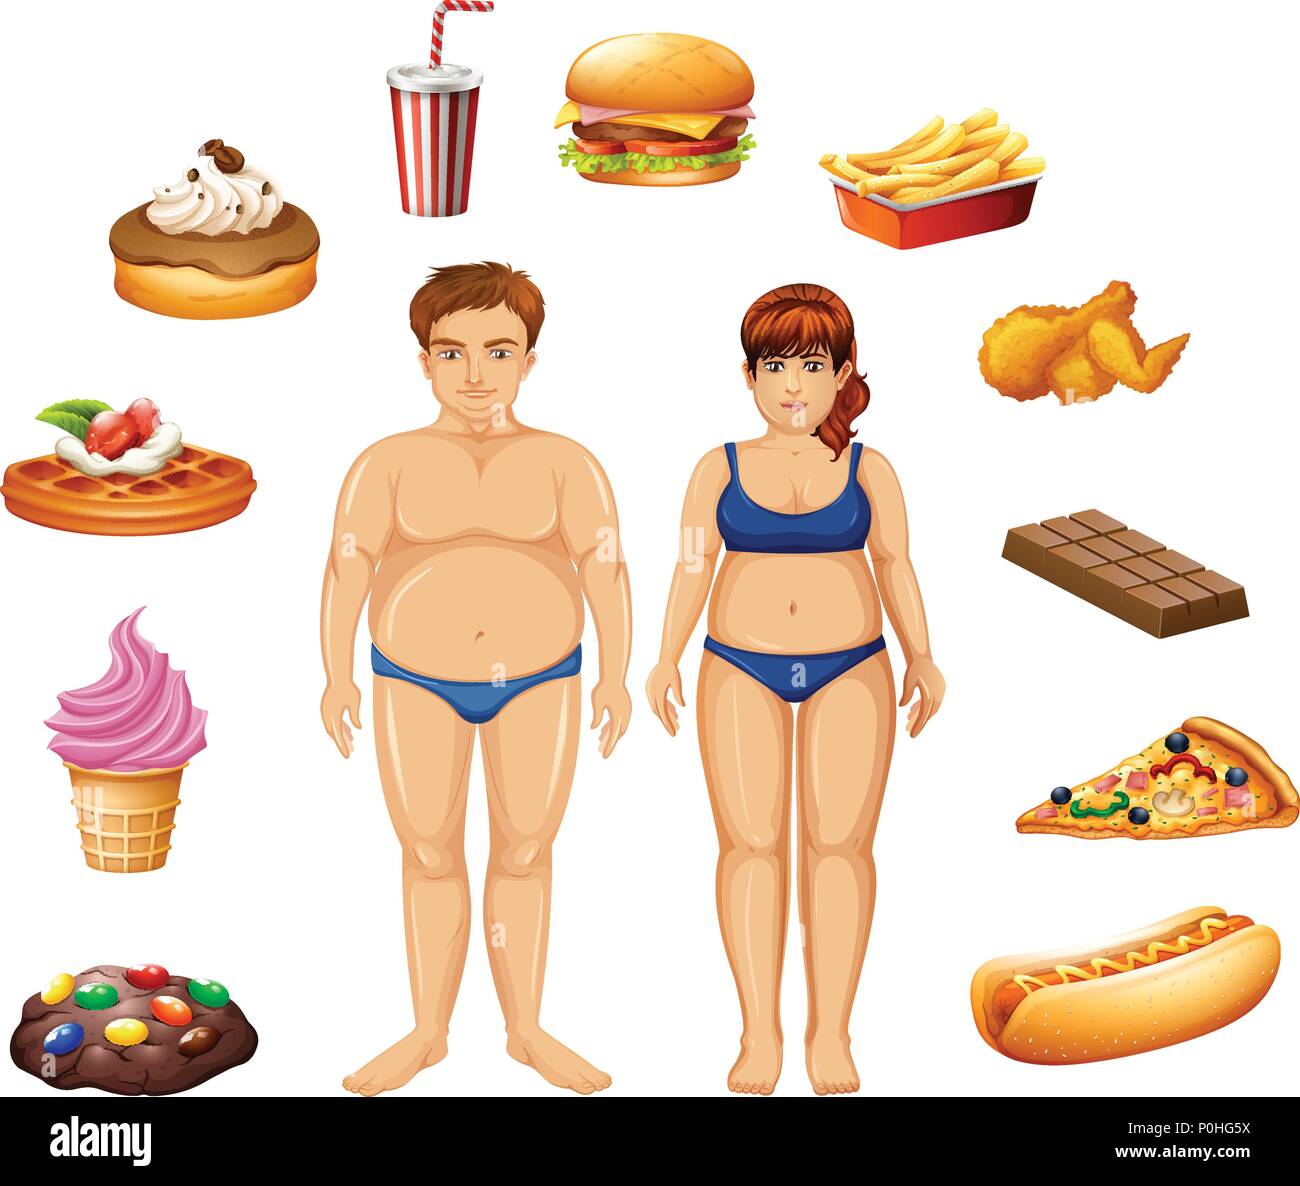 Overweight people with unhealthy food illustration Stock Vector